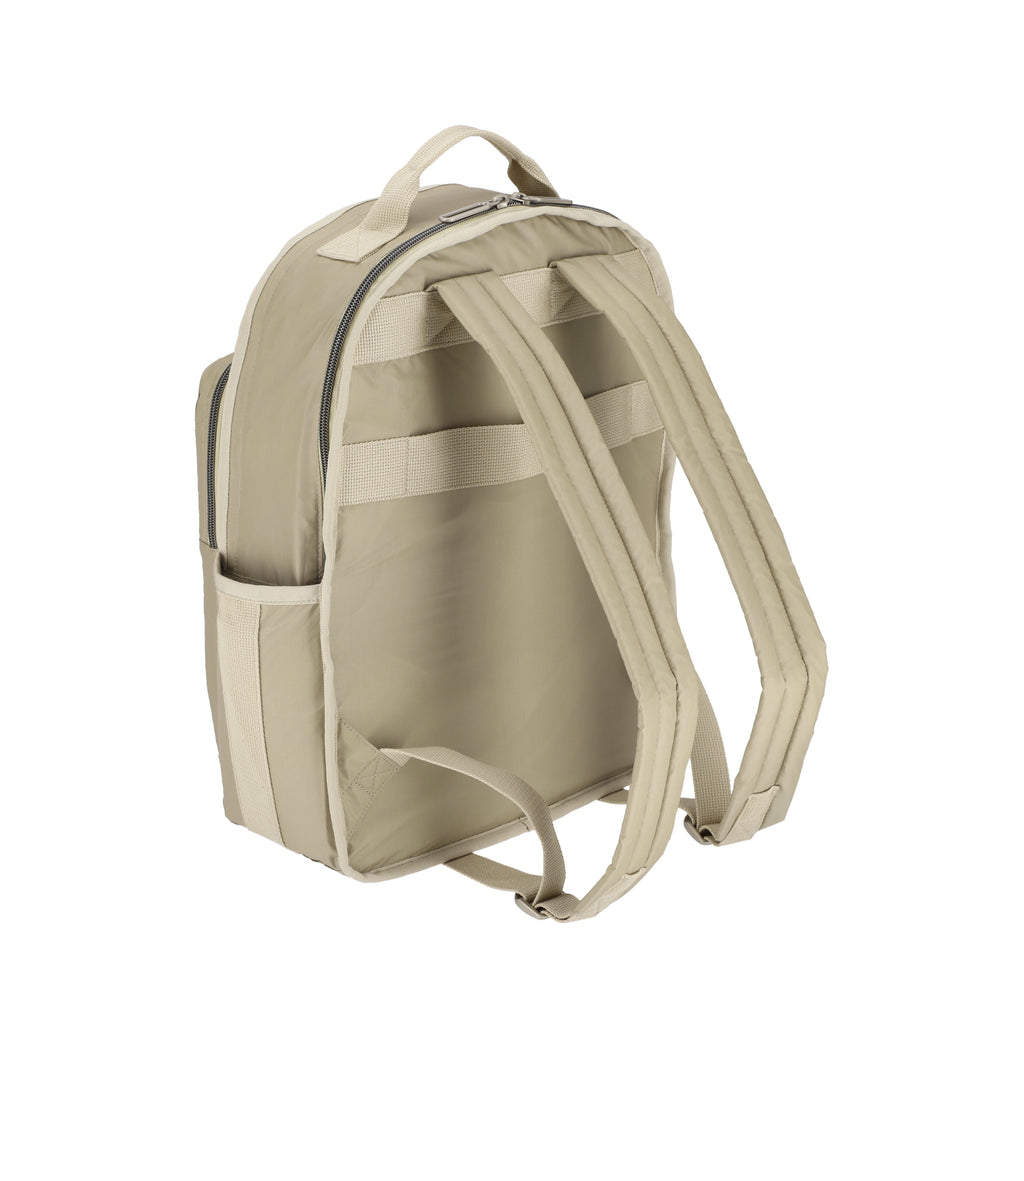 Essential Carryall Backpack - 25311523602480